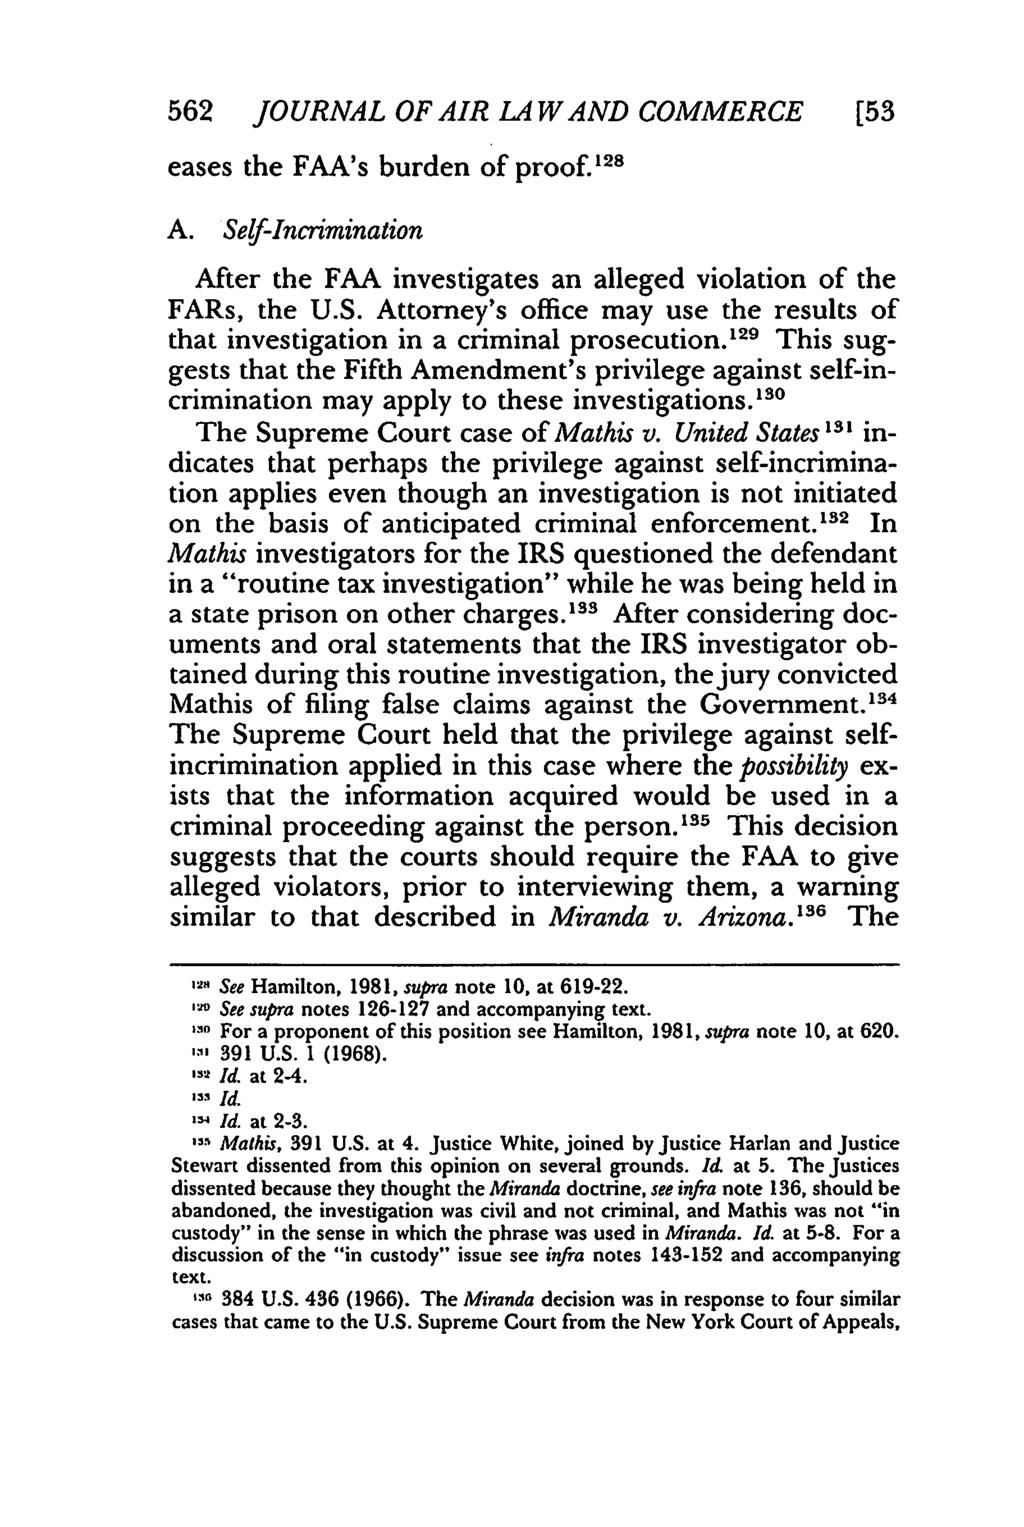 562 JOURNAL OF AIR LA WAND COMMERCE [53 eases the FAA's burden of proof. 128 A. Self-Incrimination After the FAA investigates an alleged violation of the FARs, the U.S. Attorney's office may use the results of that investigation in a criminal prosecution.